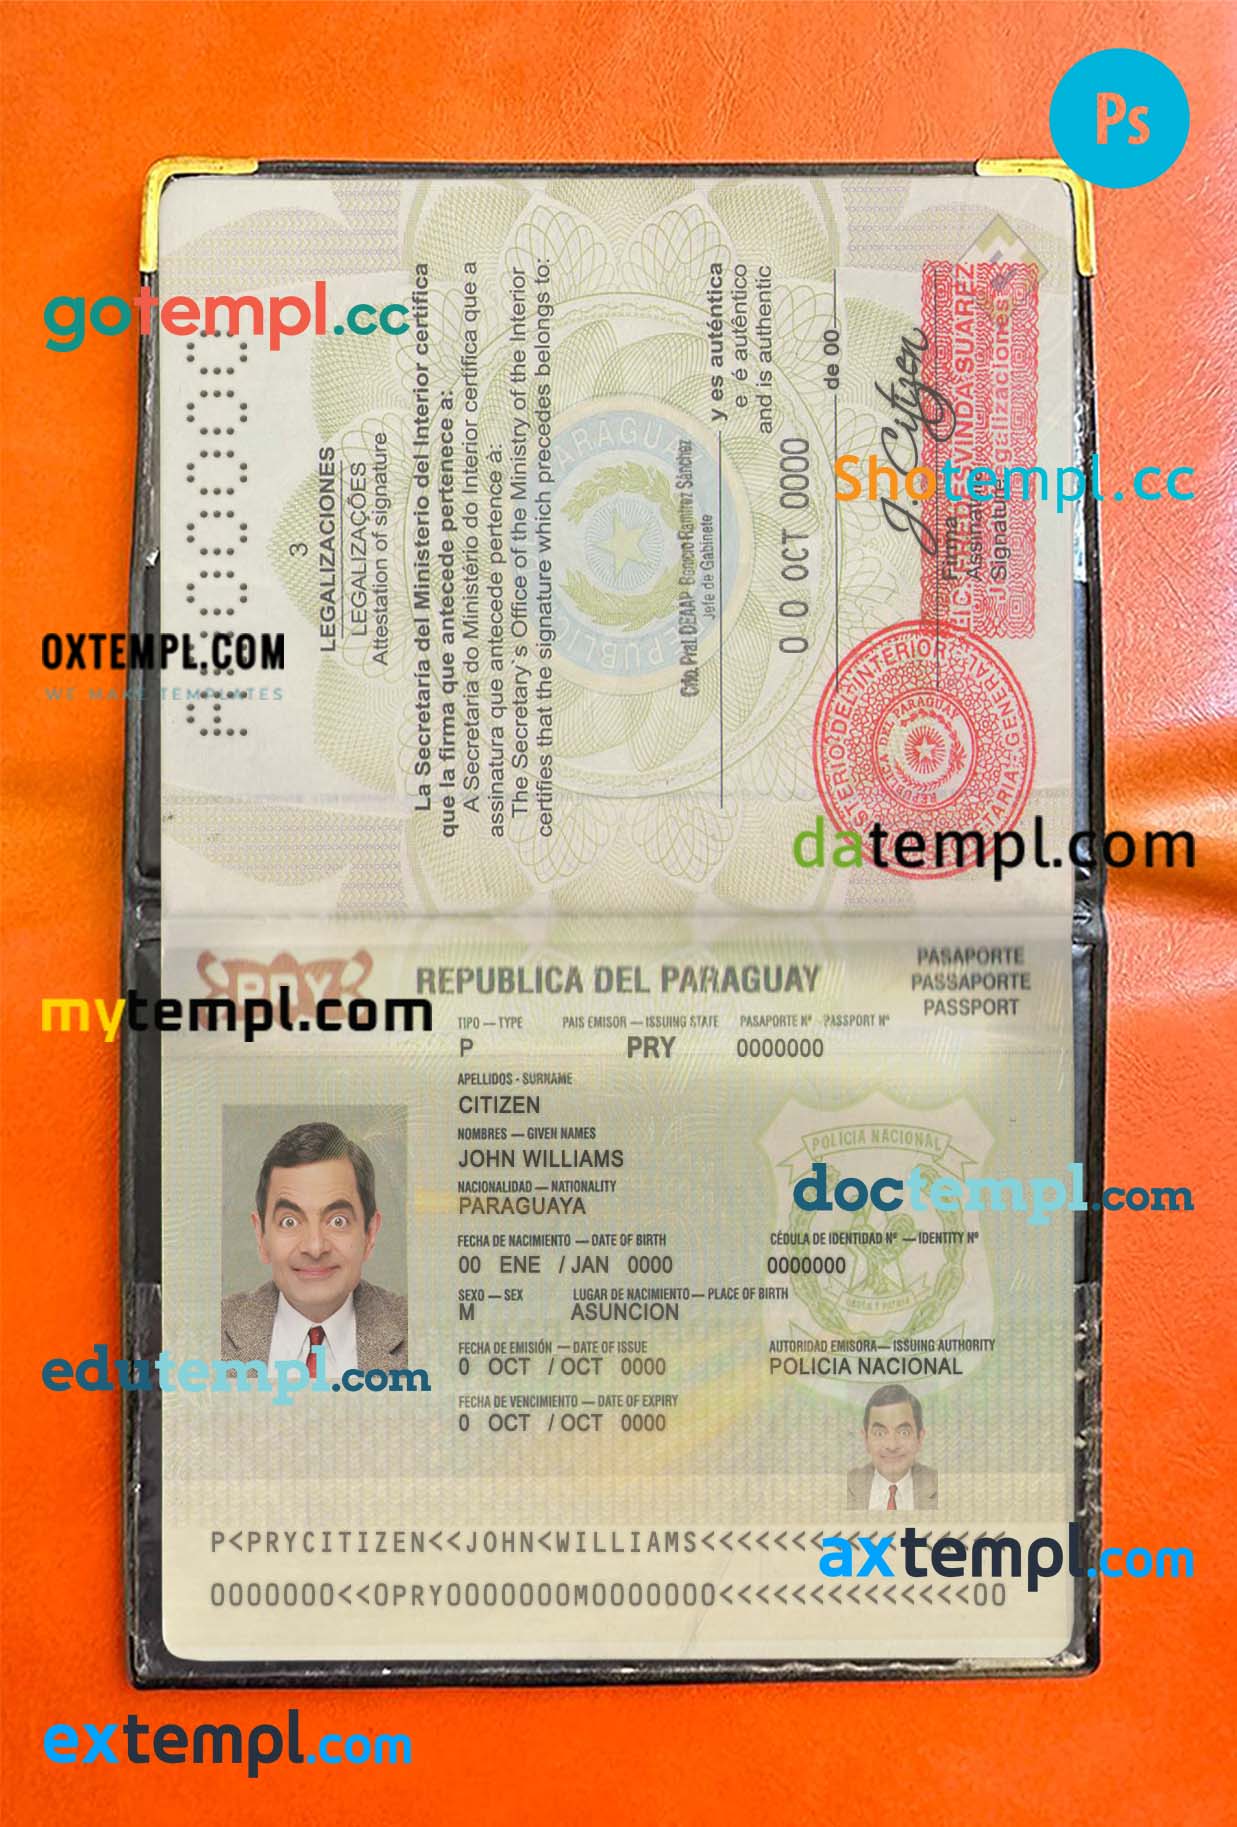 Paraguay passport psd files, editable scan and snapshot sample, 2 in 1